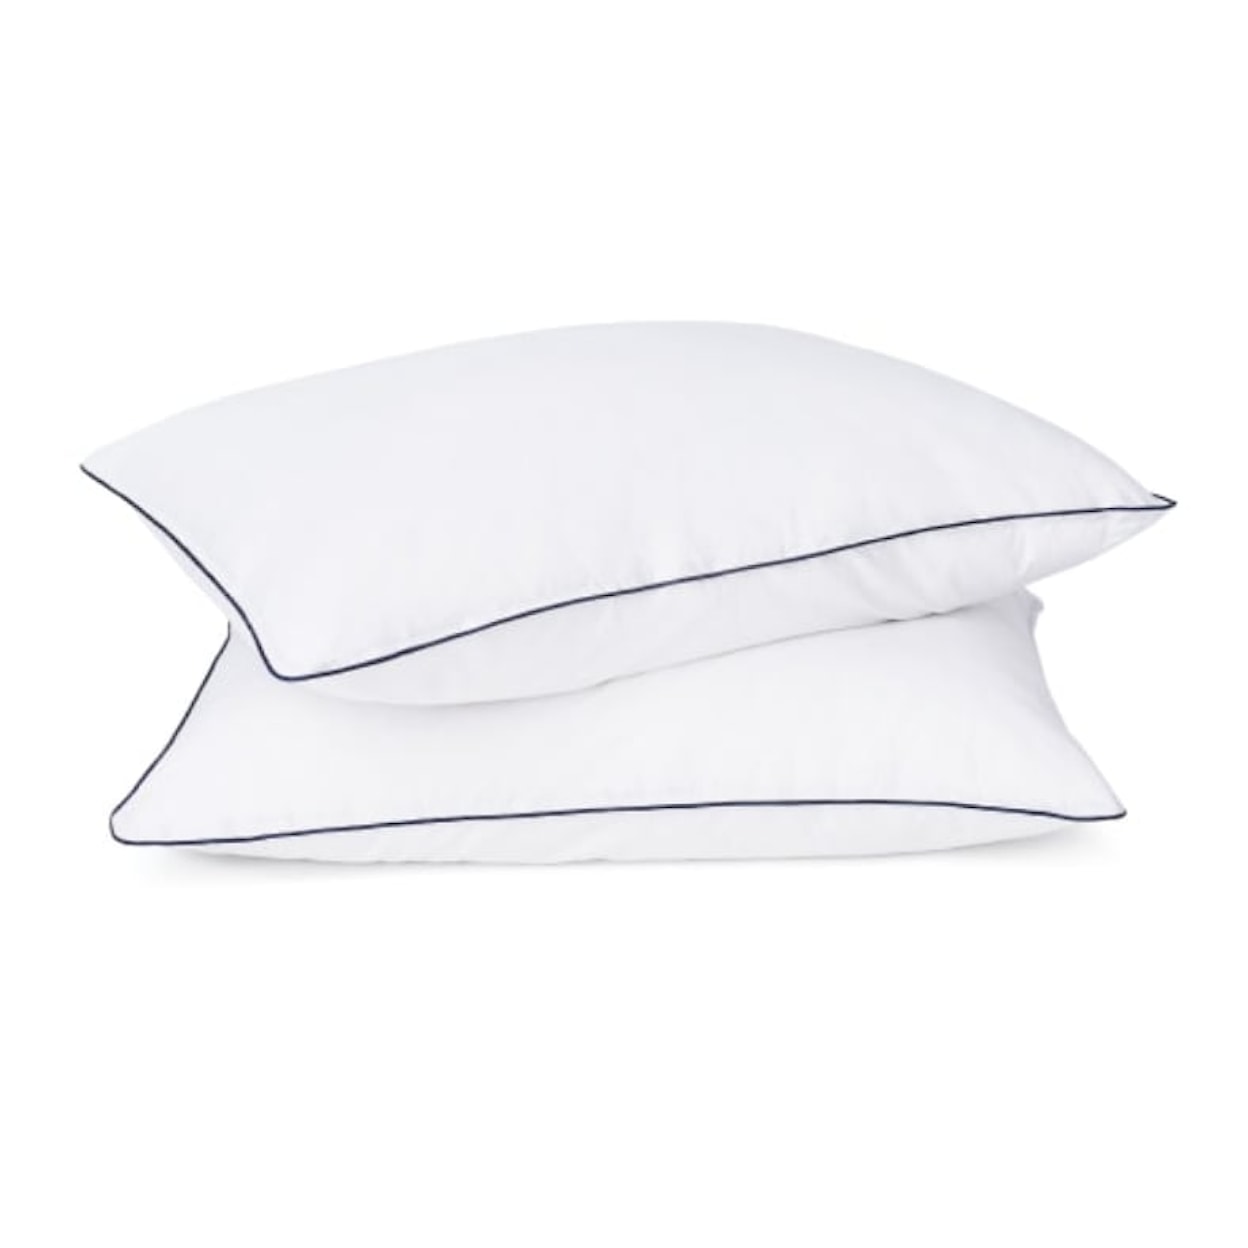 Helix Sunset Luxe Sunset Luxe King + FREE Pillows